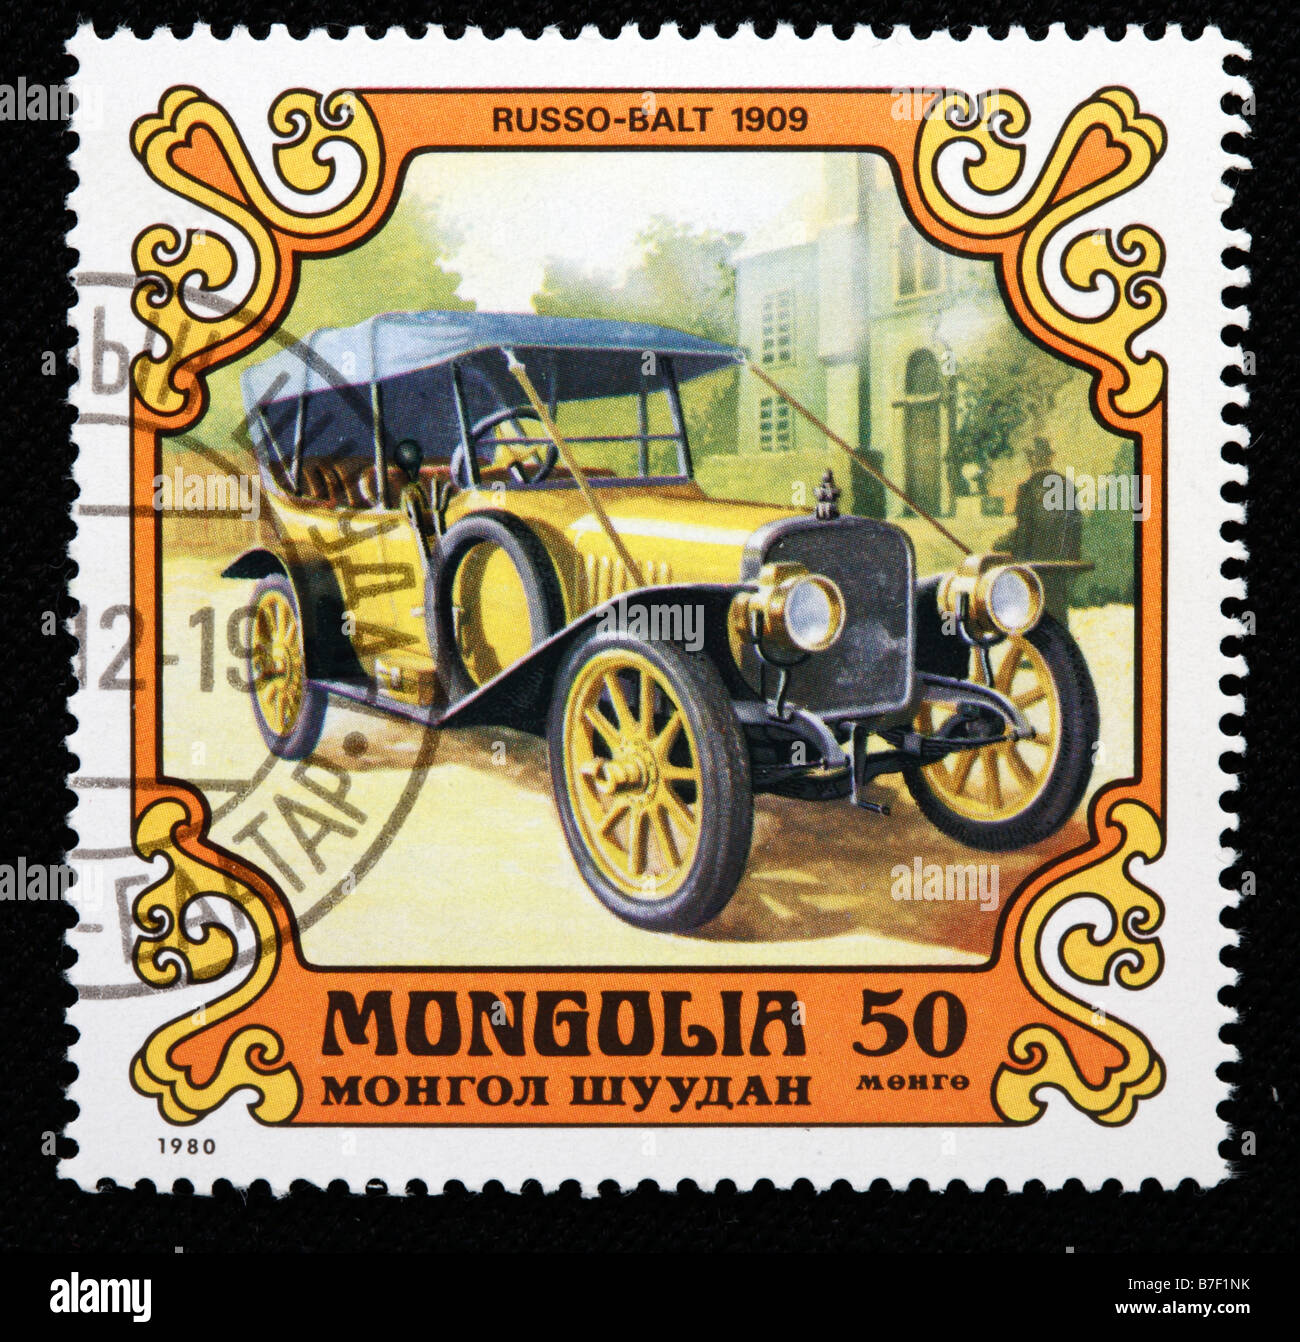 History of transport, car Russo Balt (1909), postage stamp, Mongolia, 1980 Stock Photo